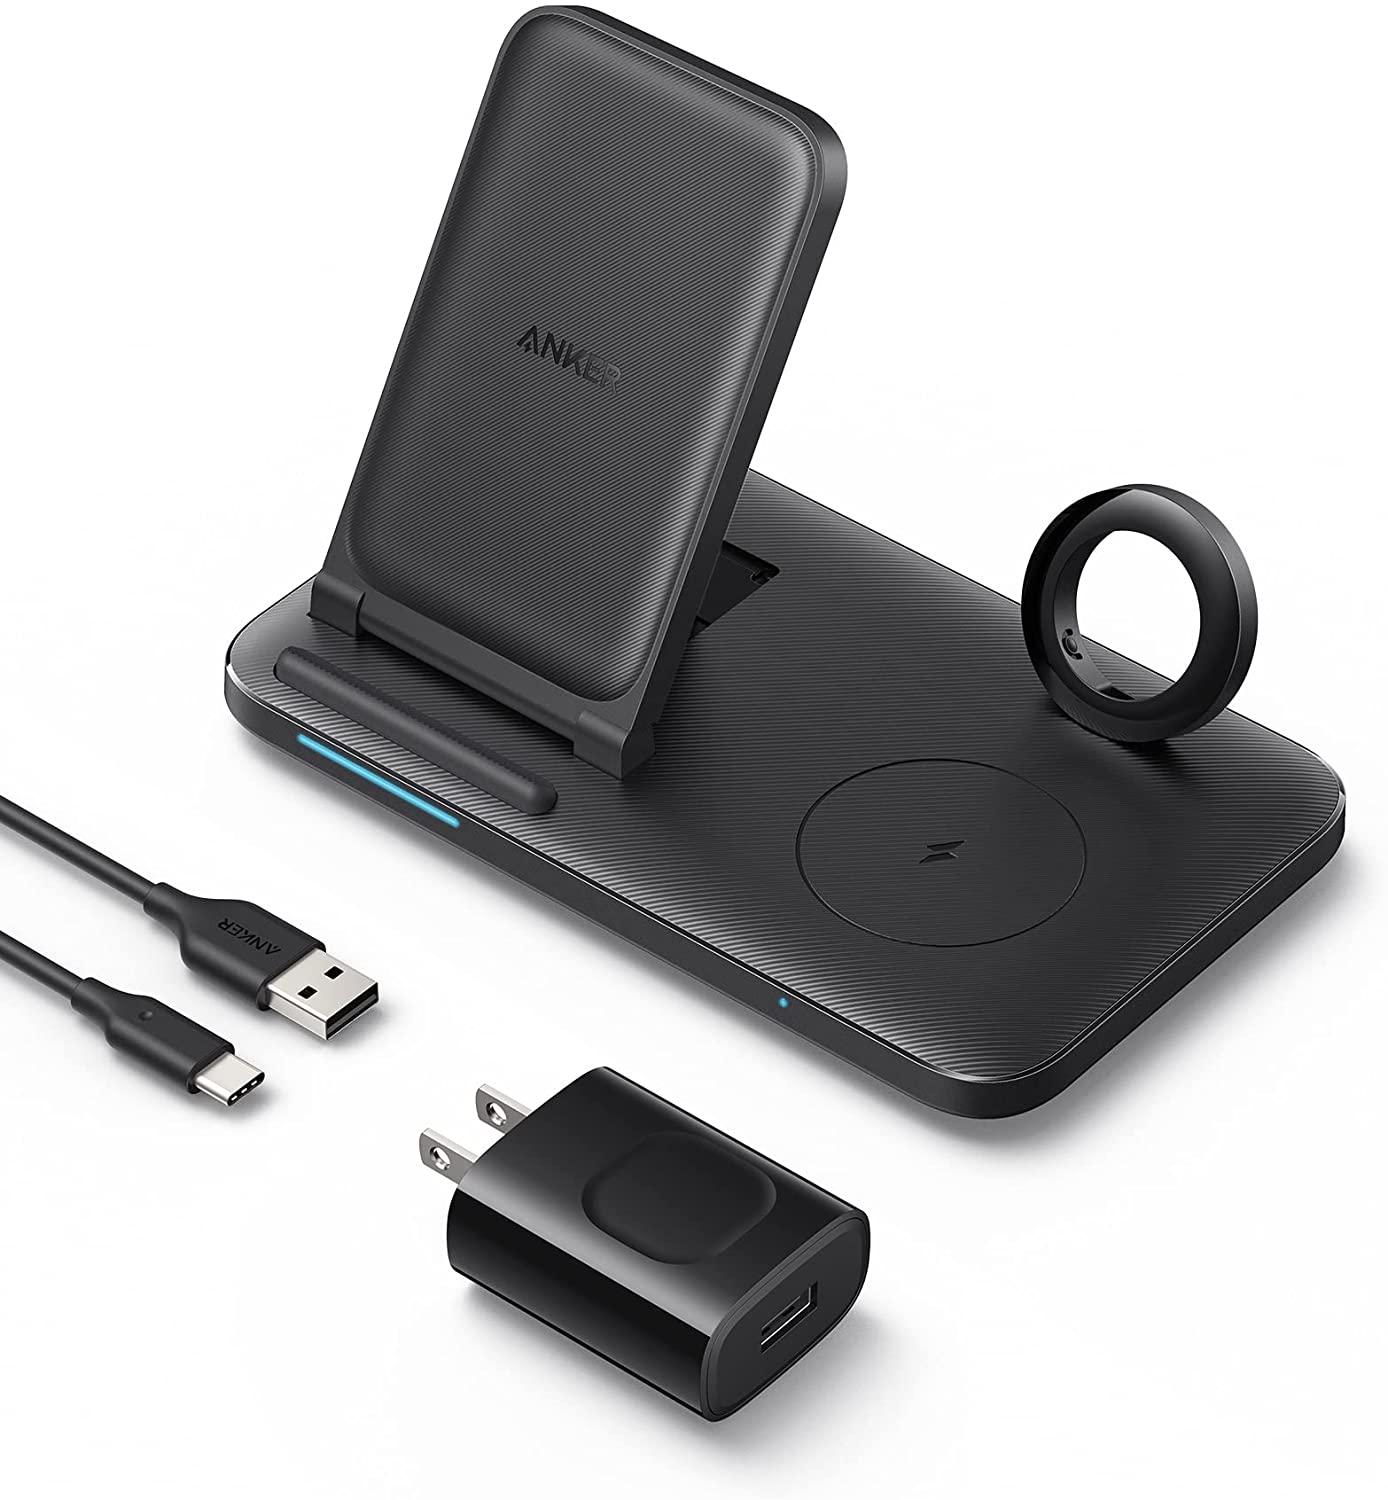 Anker 335 Wireless Charger (3-in-1 Station) $23.99 + Free Shipping w/ Prime or orders $25+